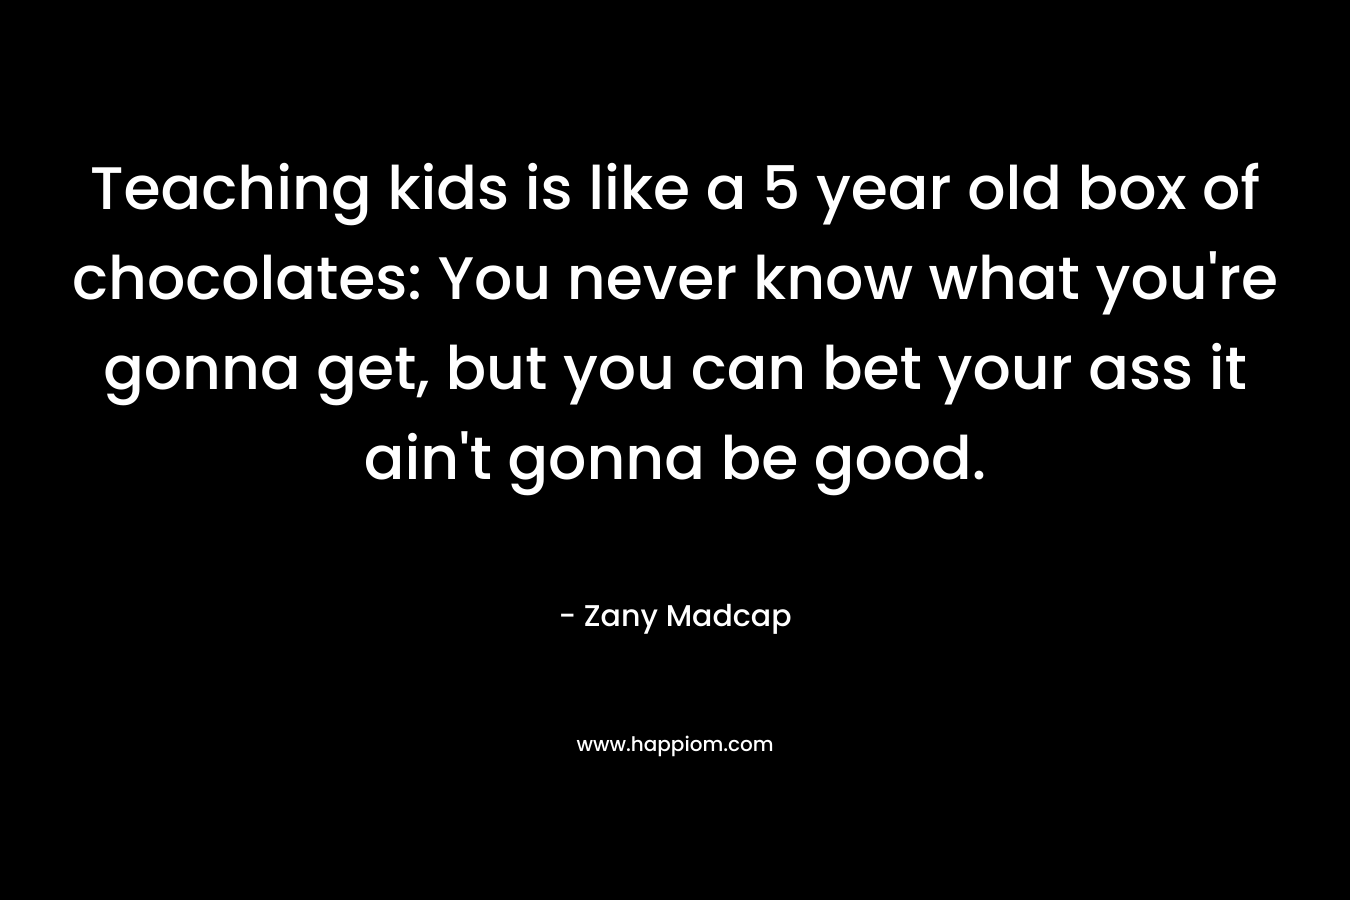 Teaching kids is like a 5 year old box of chocolates: You never know what you're gonna get, but you can bet your ass it ain't gonna be good.